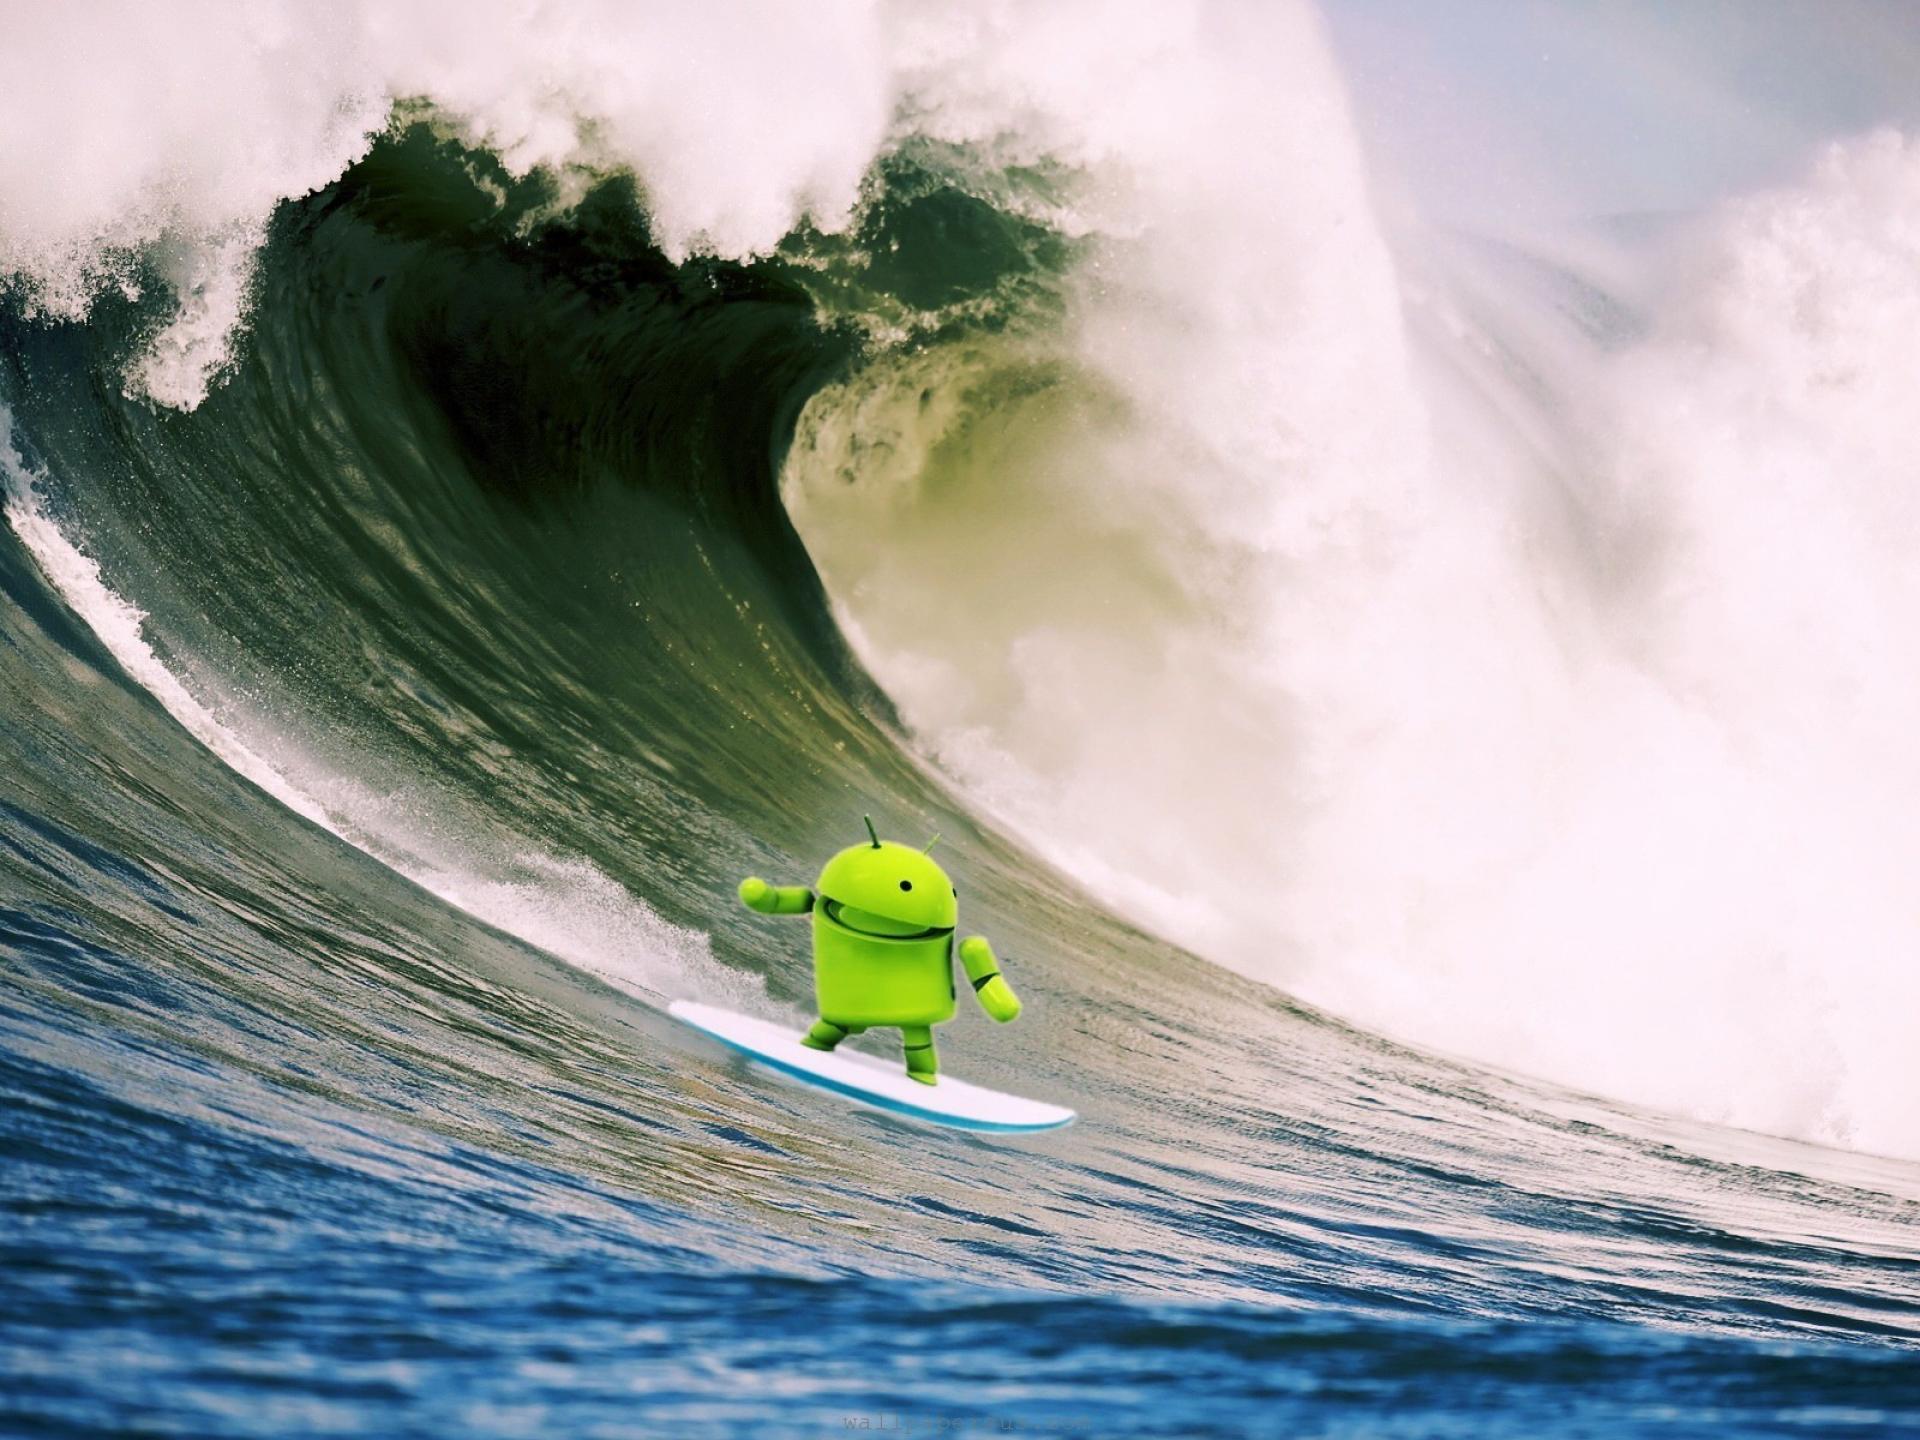 Surfing Computer desktop wallpapers 800x600 Sea Waves Android Surfing